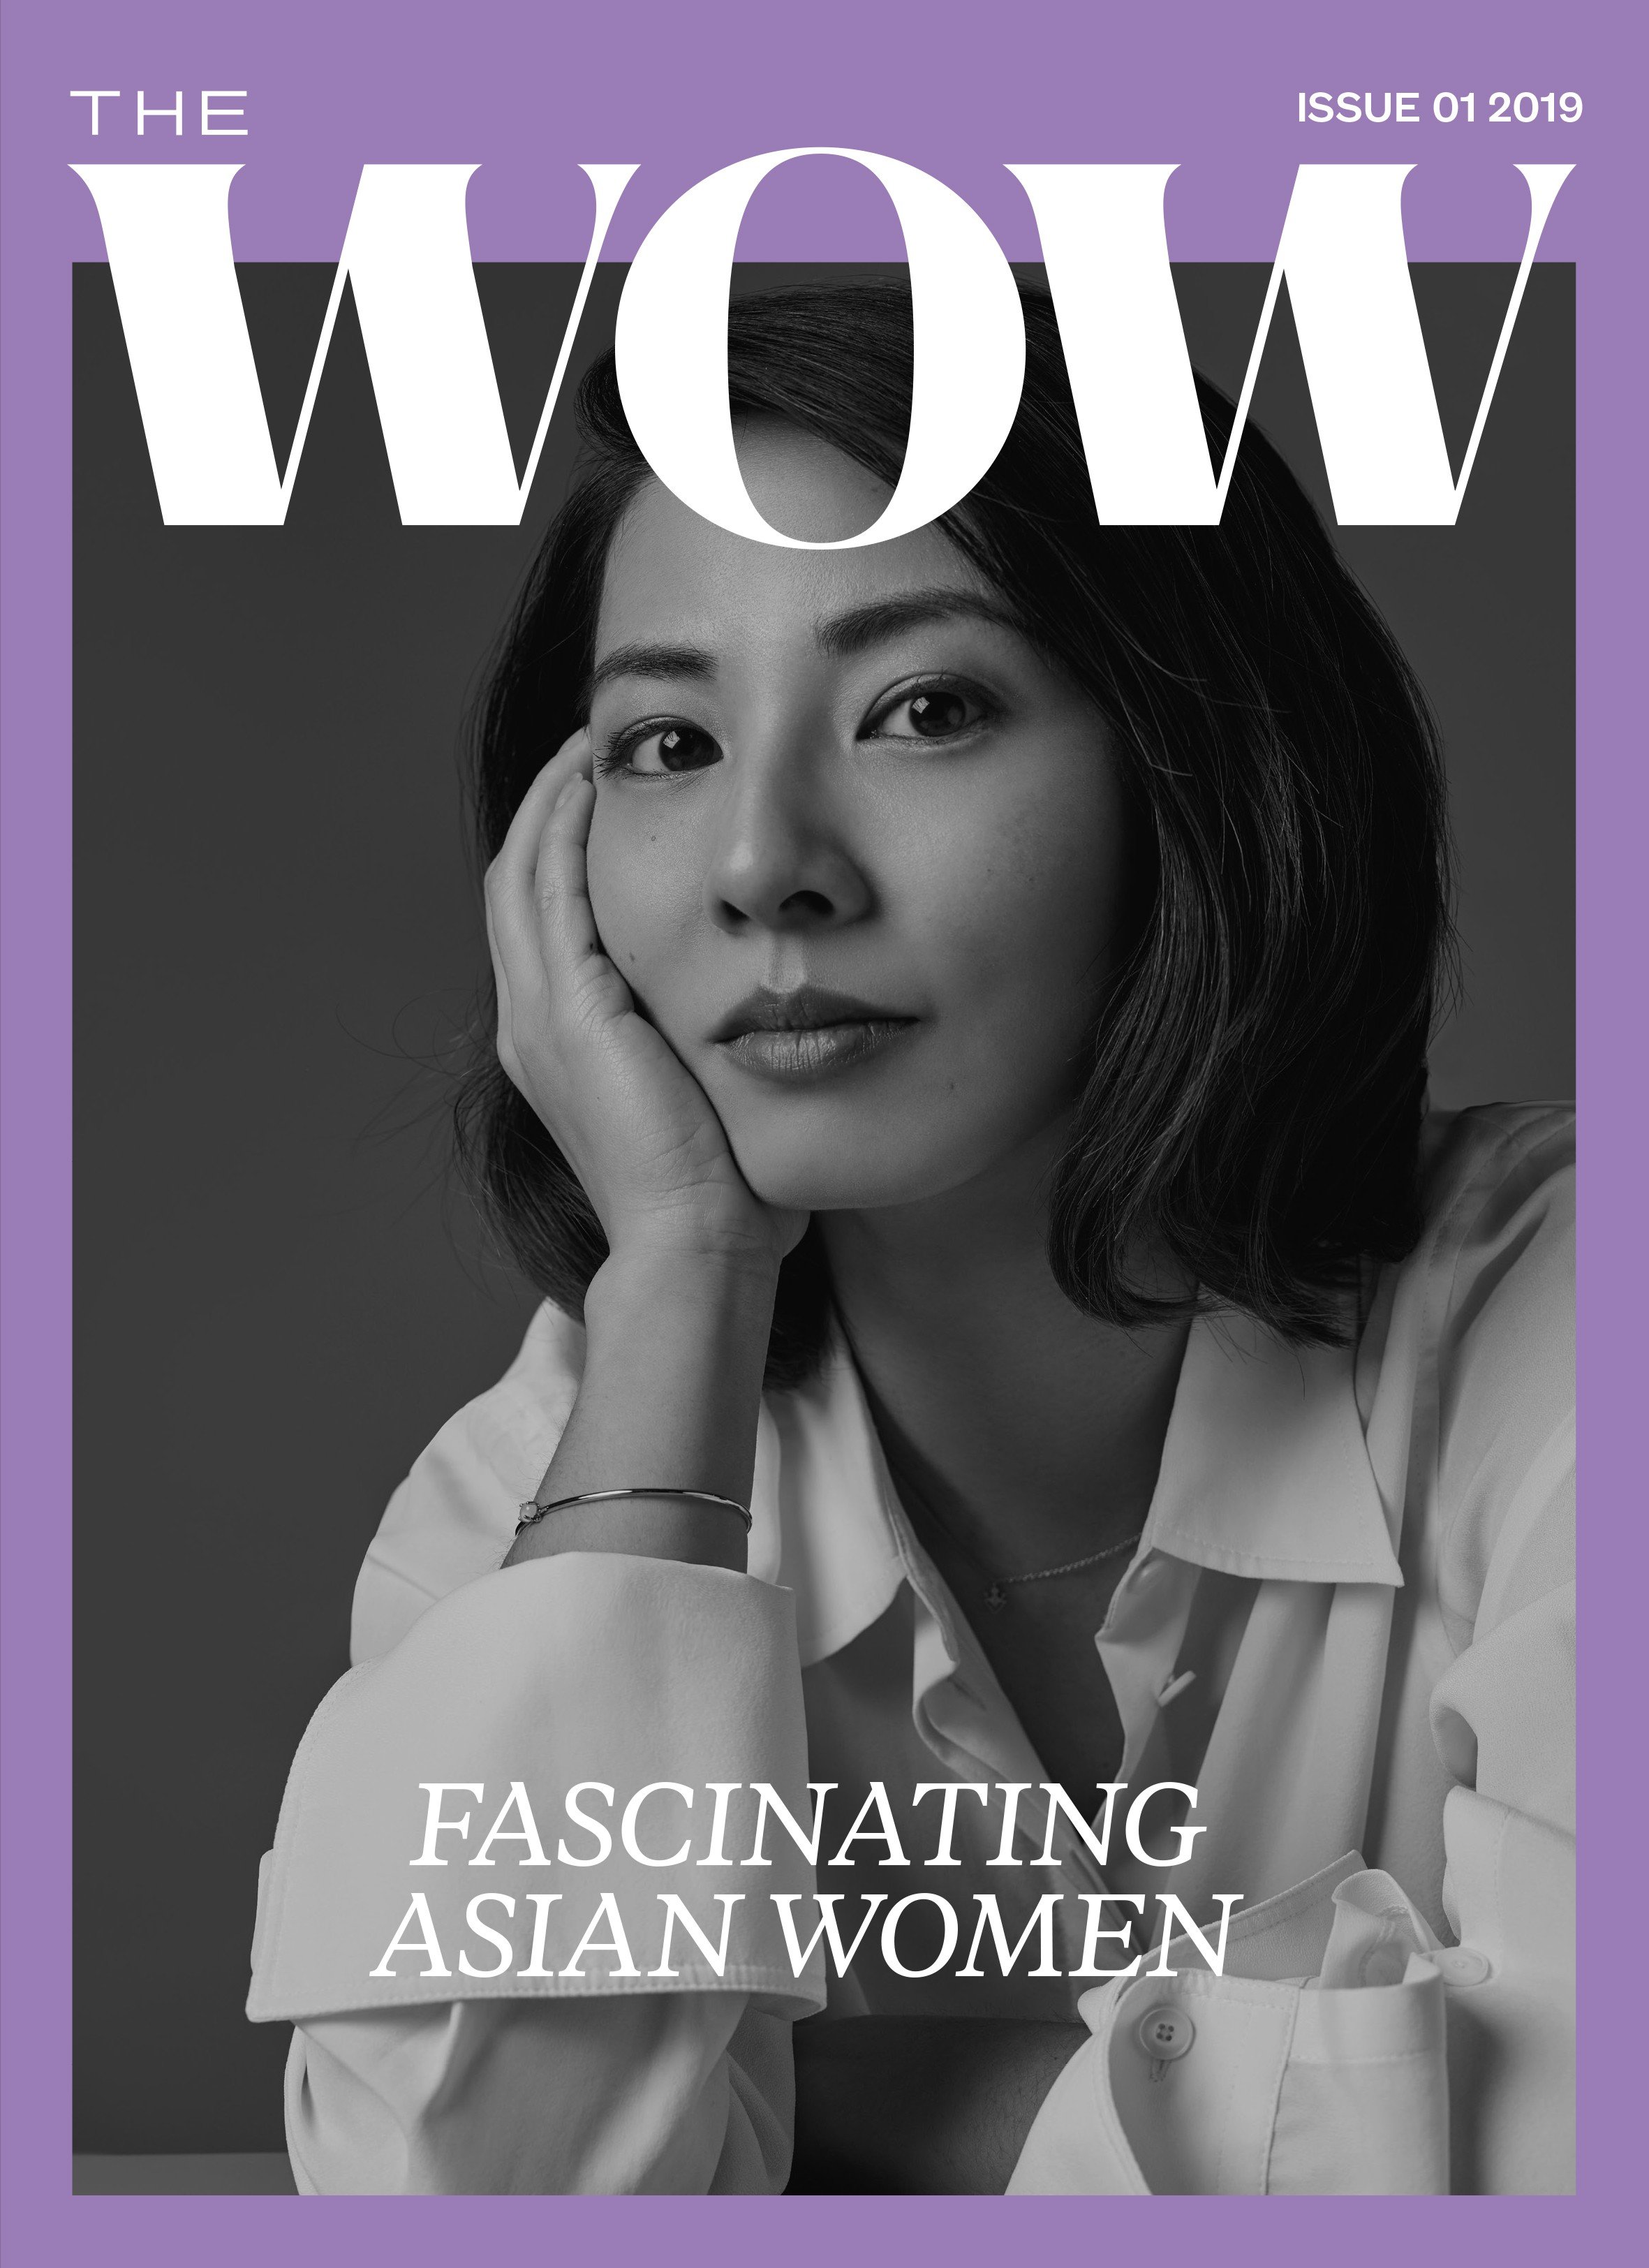 One of the covers of the first issue of The Wow, an independent magazine launched in the UK targeting Asian women.